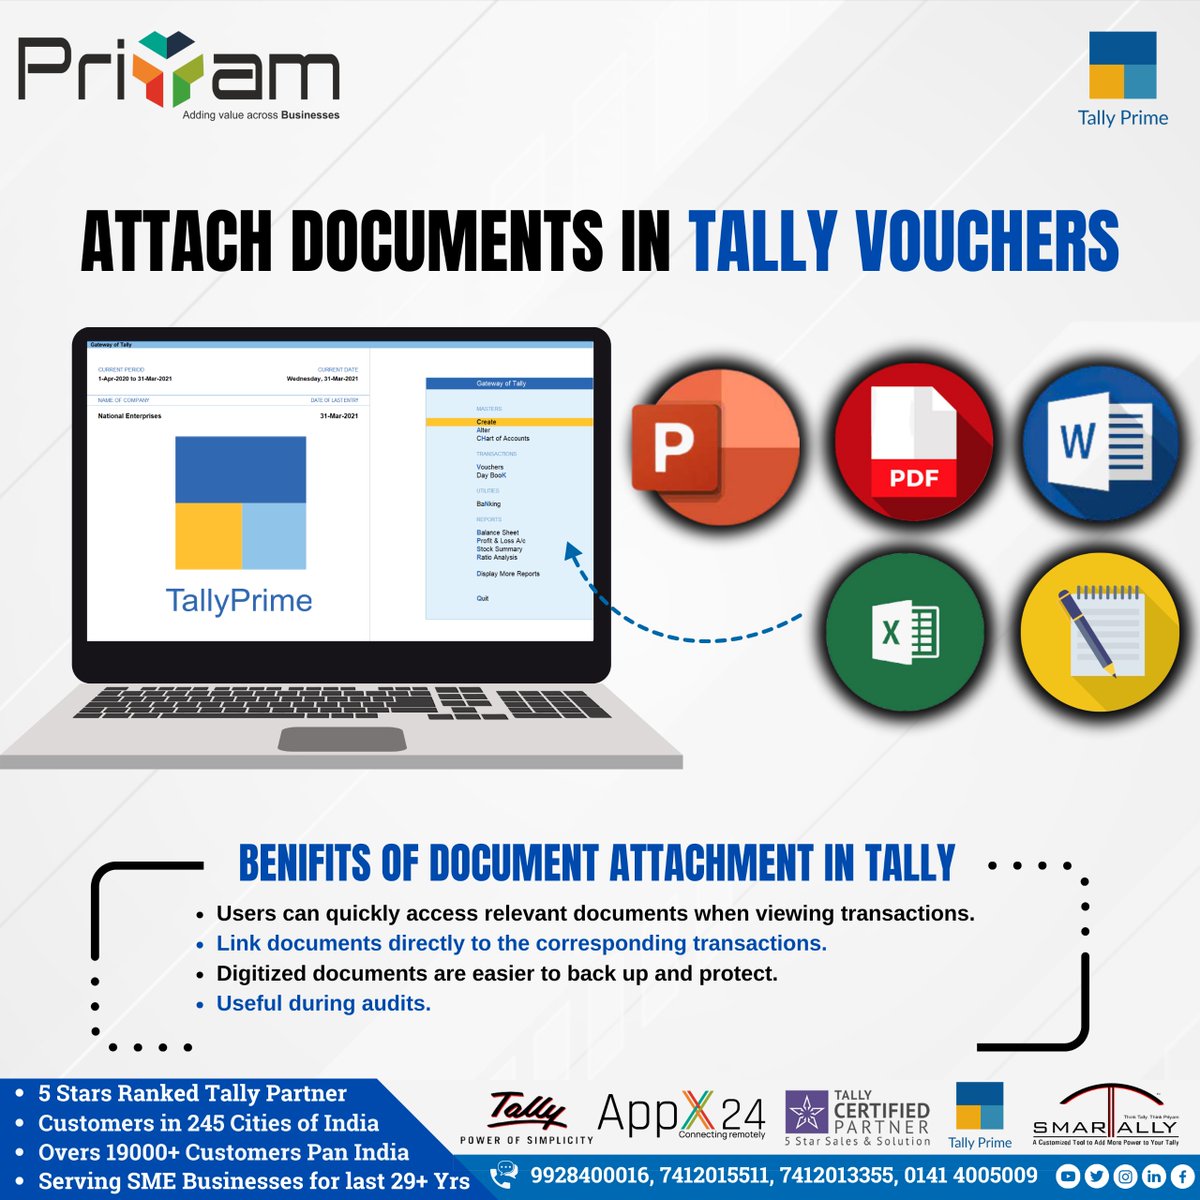 👉 Enhance your Tally experience with document attachment! 
.
.
.
.
#tally #documentattachment #priyamhaina #priyam #tallyprime #tallysolutions #tallysoftware #business #businesssoftware #smallbusiness #textile #automobile #businessgrowth #jaipur #rajasthan #Instagram